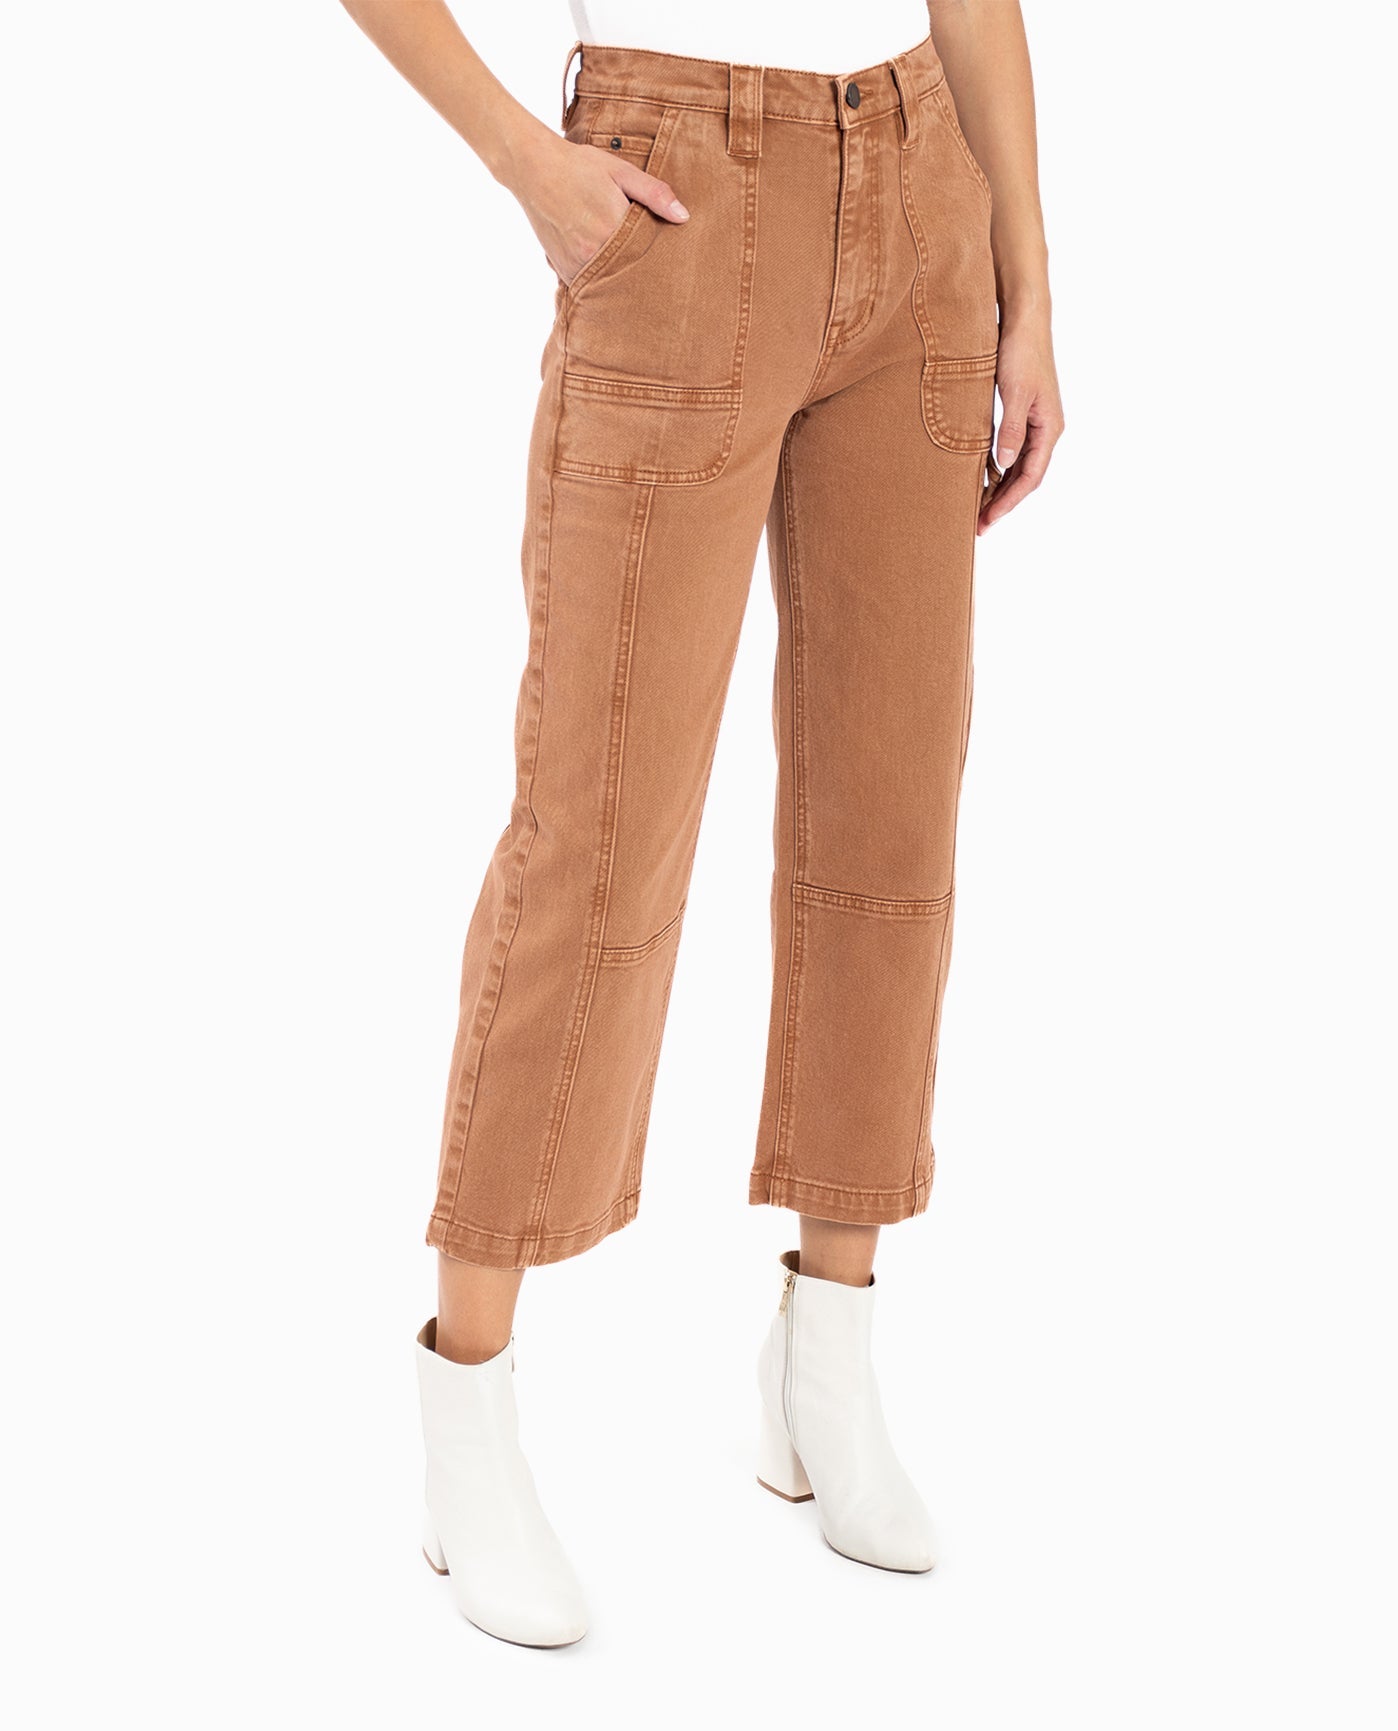 SIDE OF HIGH RISE WIDE LEG ANKLE JEAN | Cinnamon Wash